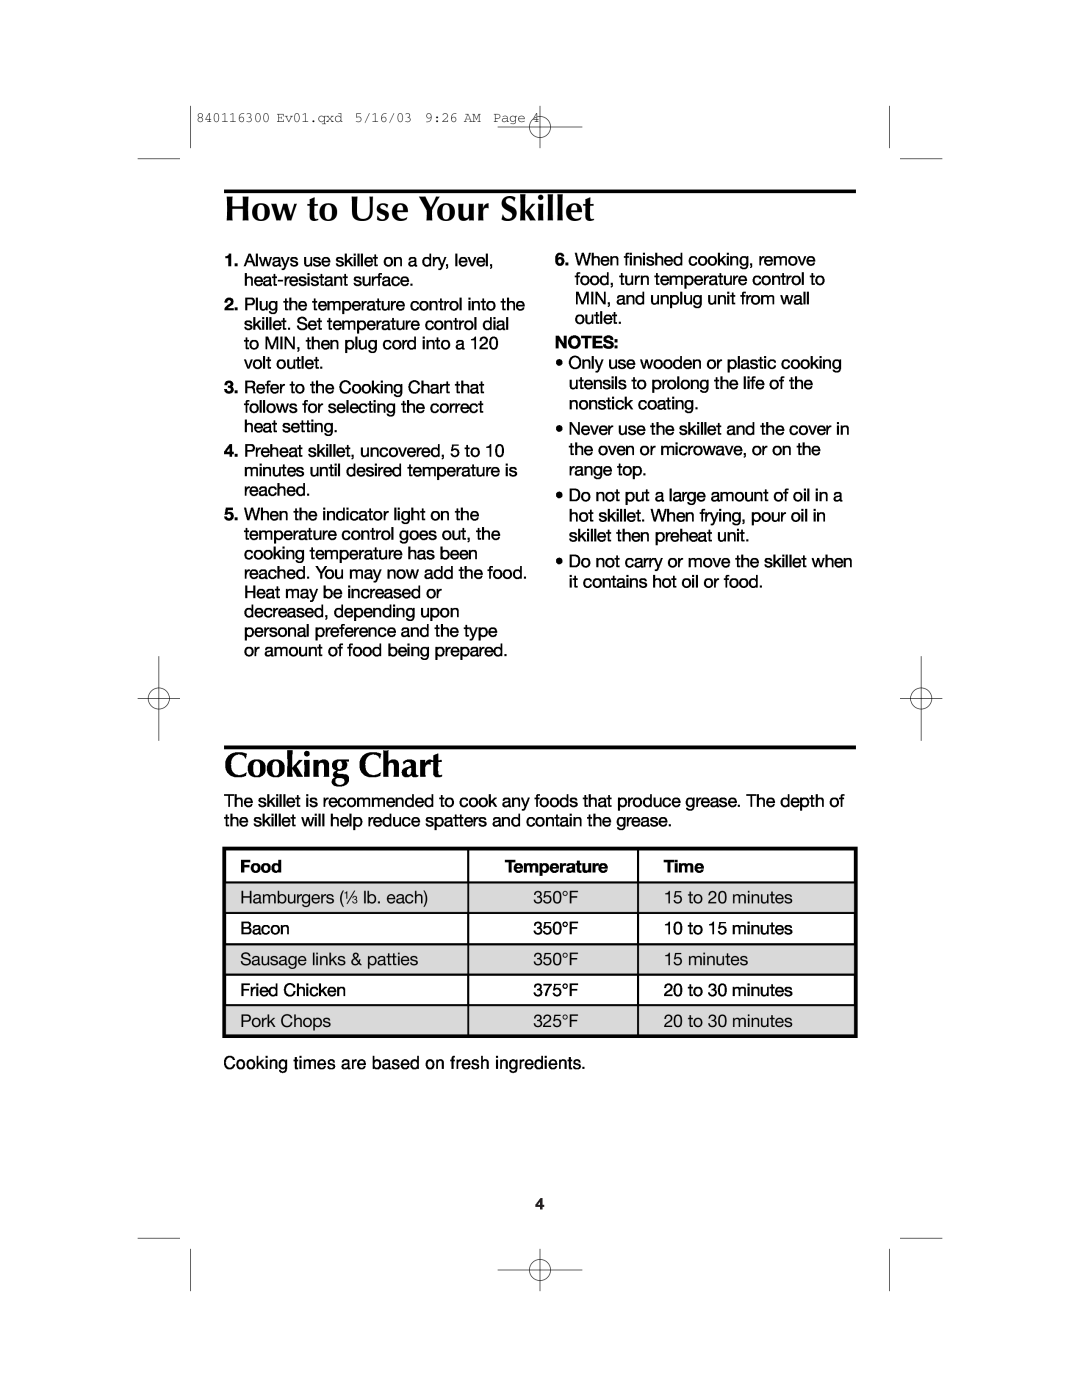 Proctor-Silex 840116300 manual How to Use Your Skillet, Cooking Chart, Food, Temperature, Time 